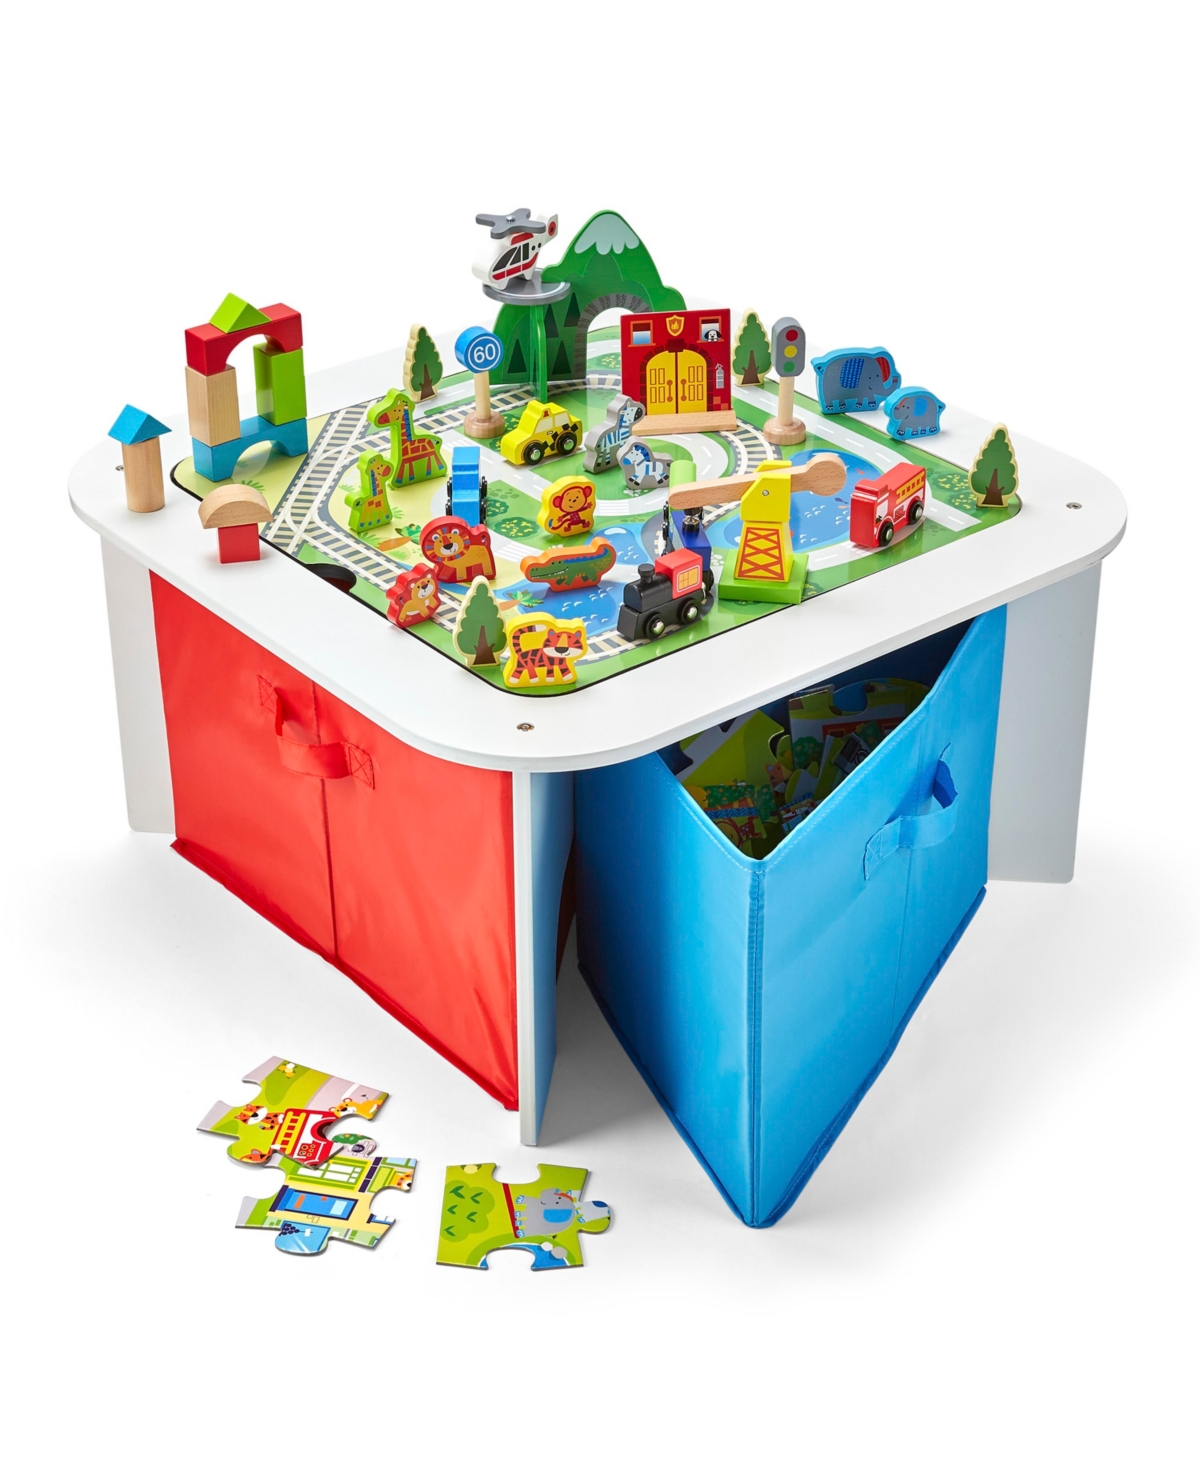 Imaginarium Ready To Play Table Set, Created For You By Toys R Us In Multi